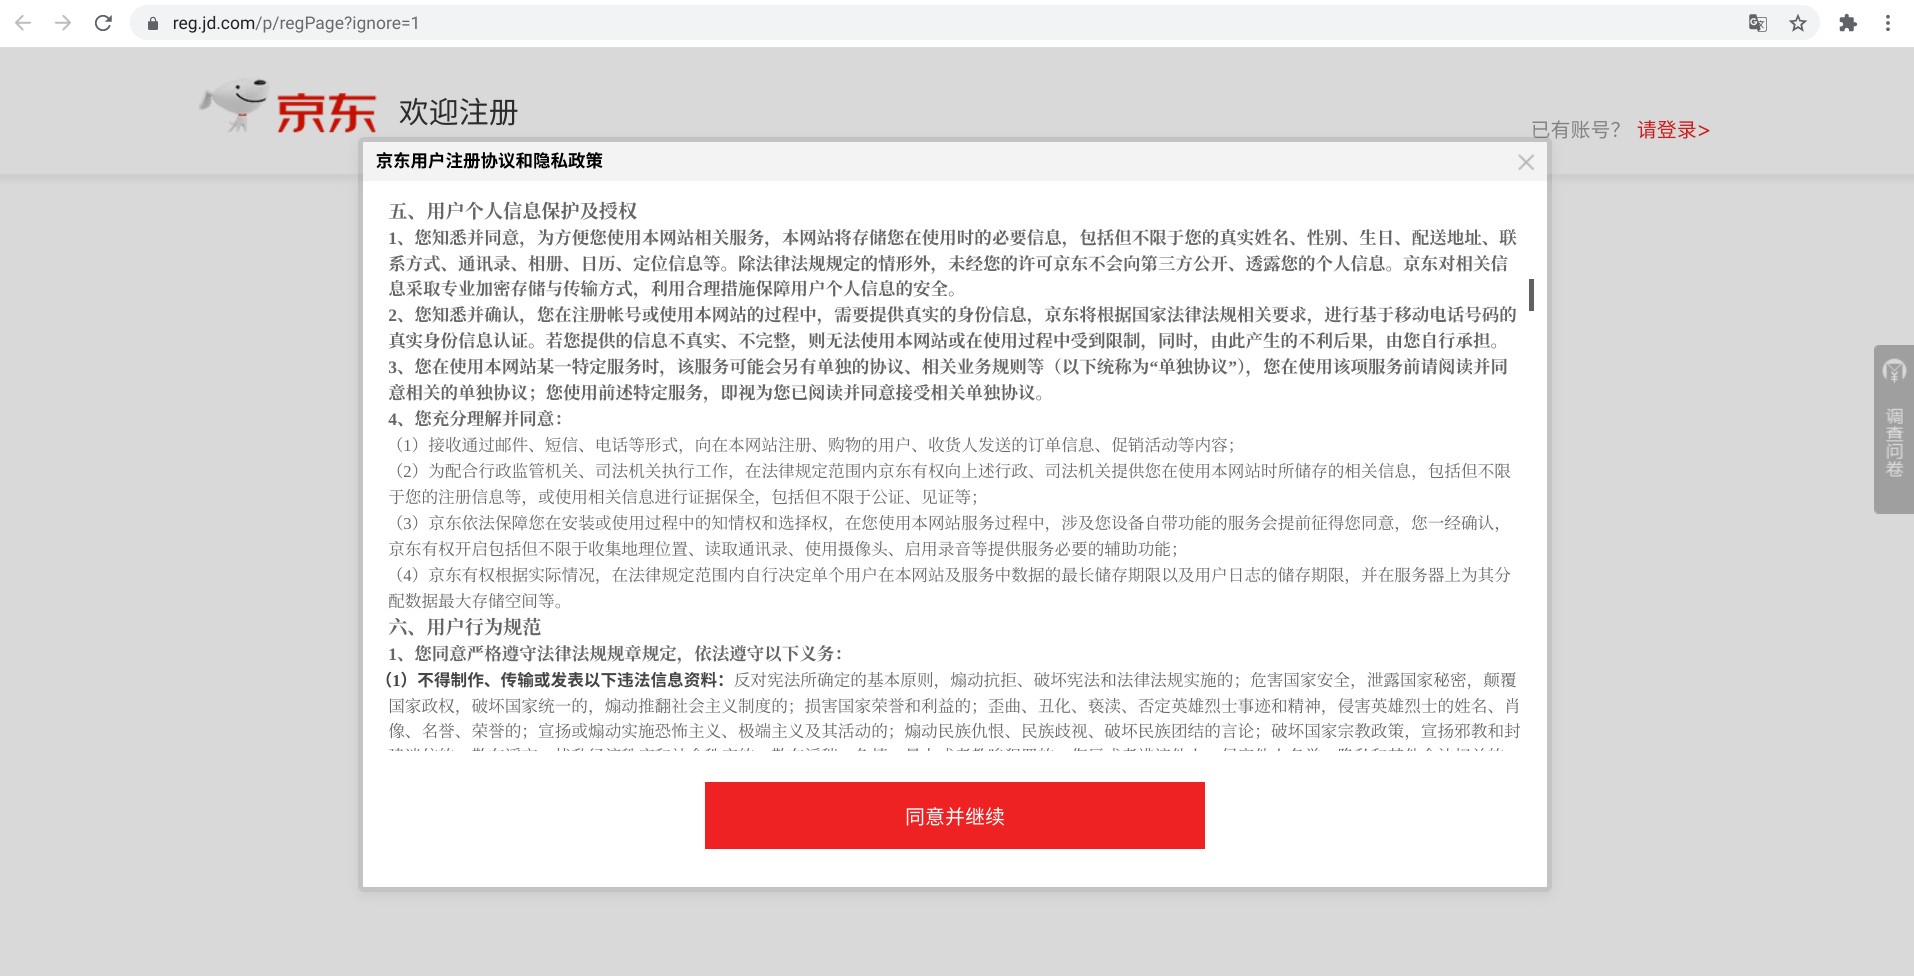 Screenshot of user registration agreement and privacy policy of Jingdong.com